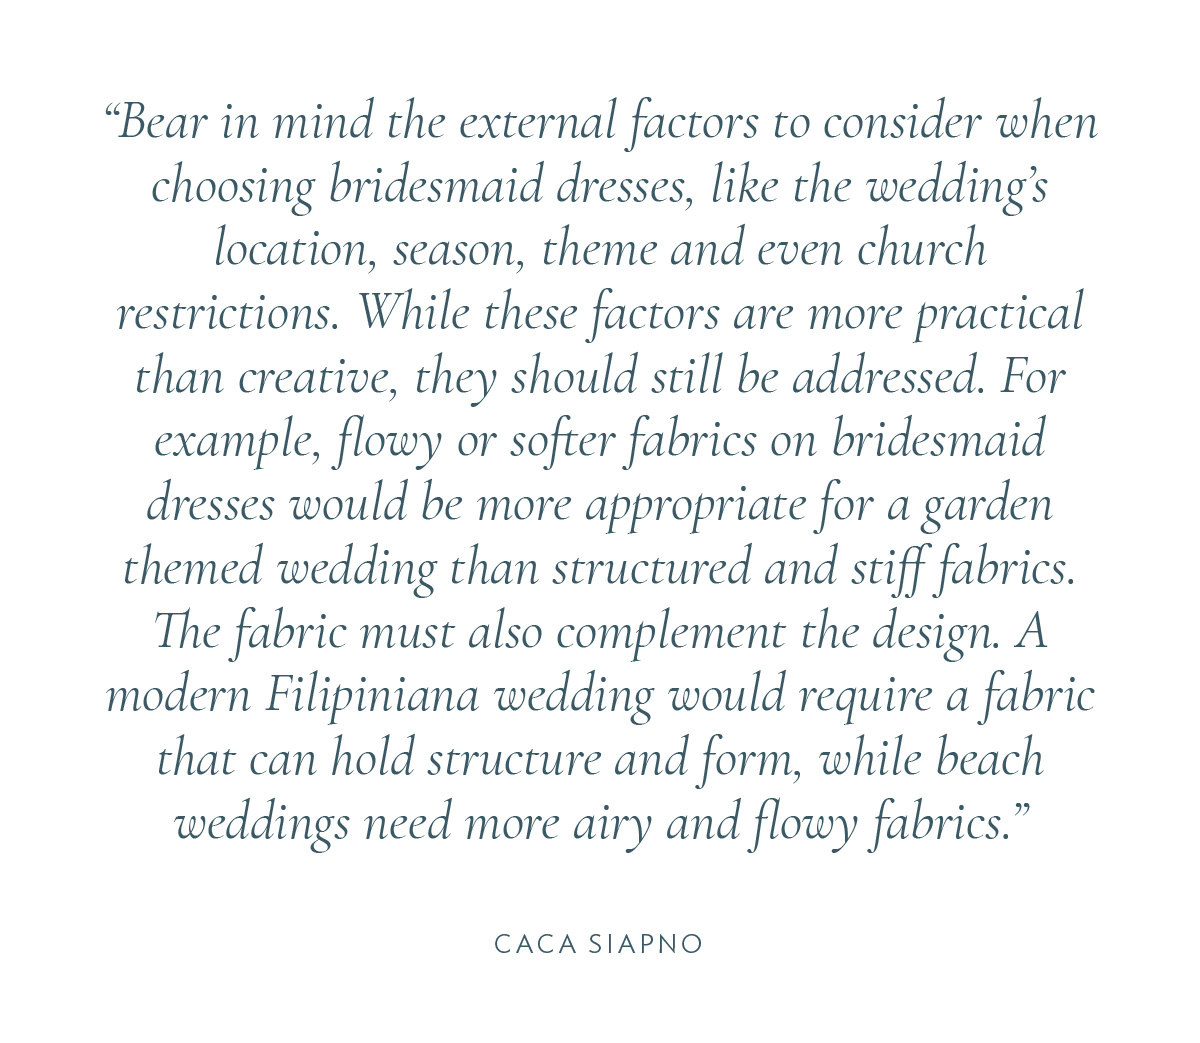 Bear in mind the external factors to consider when choosing bridesmaid dresses, like the wedding’s location, season, theme and even church restrictions. While these factors are more practical than creative, they should still be addressed. For example, flowy or softer fabrics on bridesmaid dresses would be more appropriate for a garden themed wedding than structured and stiff fabrics. The fabric must also complement the design. A modern Filipiniana wedding would require a fabric that can hold structure and form, while beach weddings need more airy and flowy fabrics.